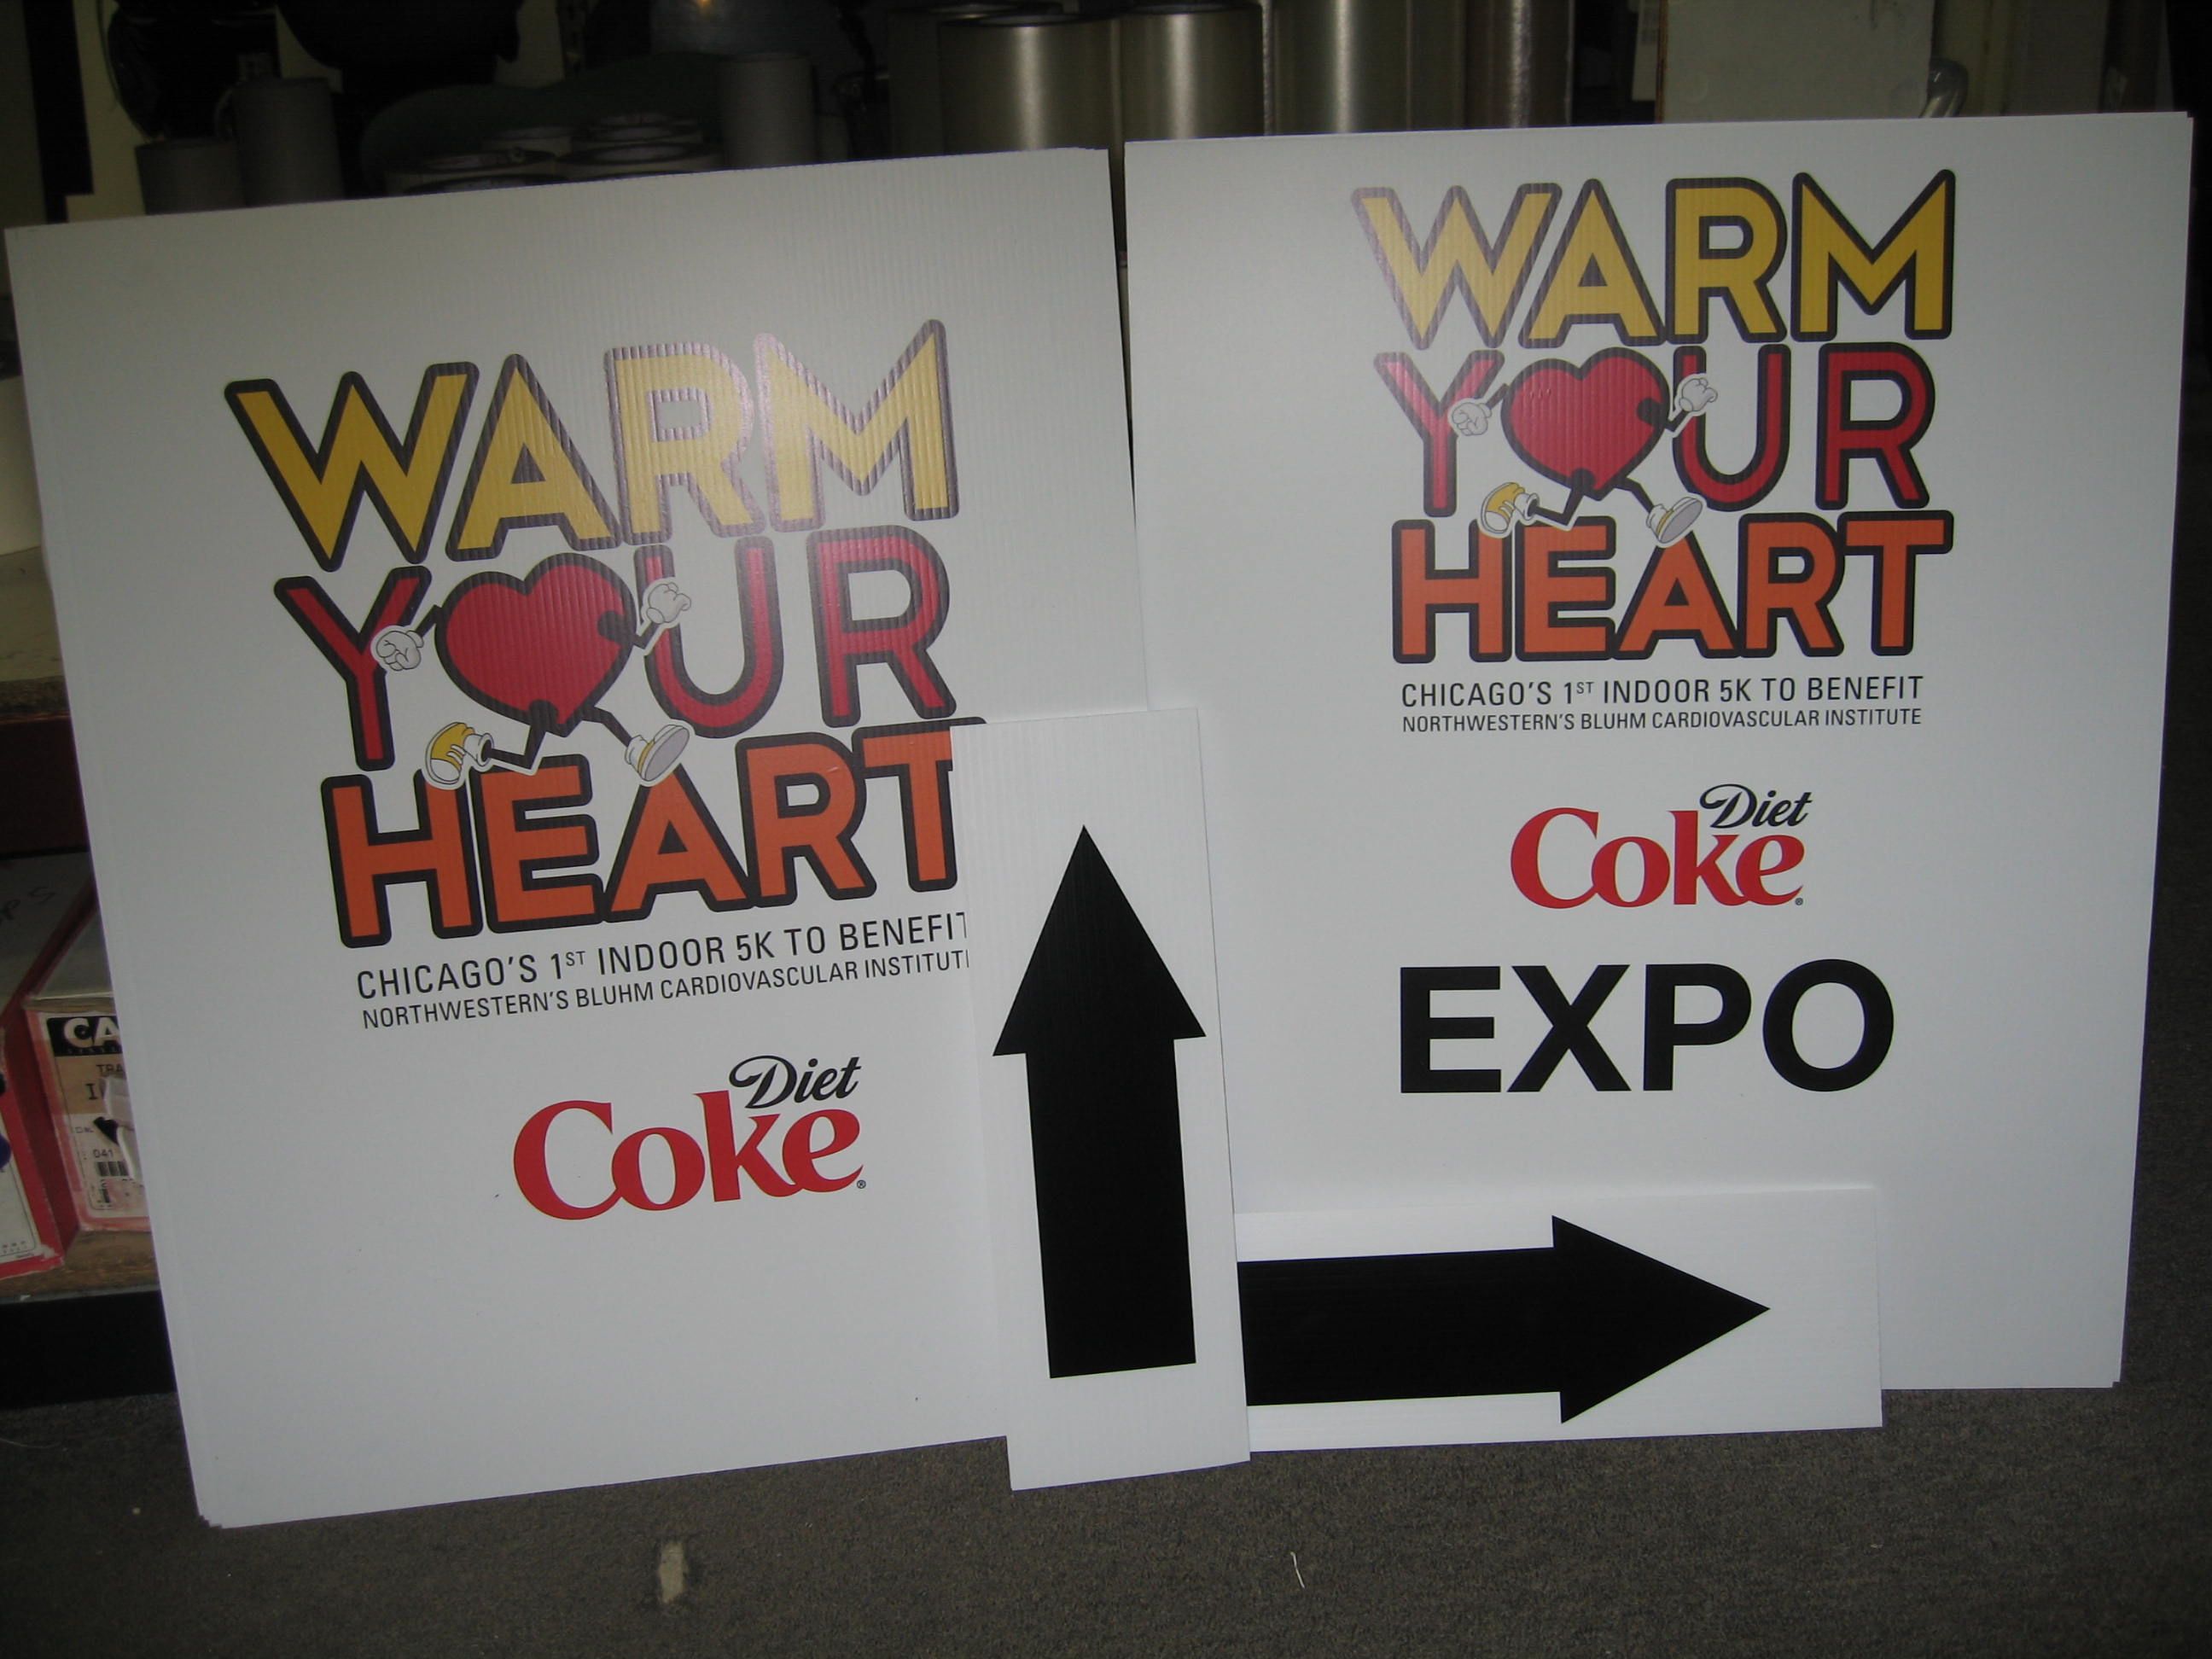 Warm Your Heart event signs